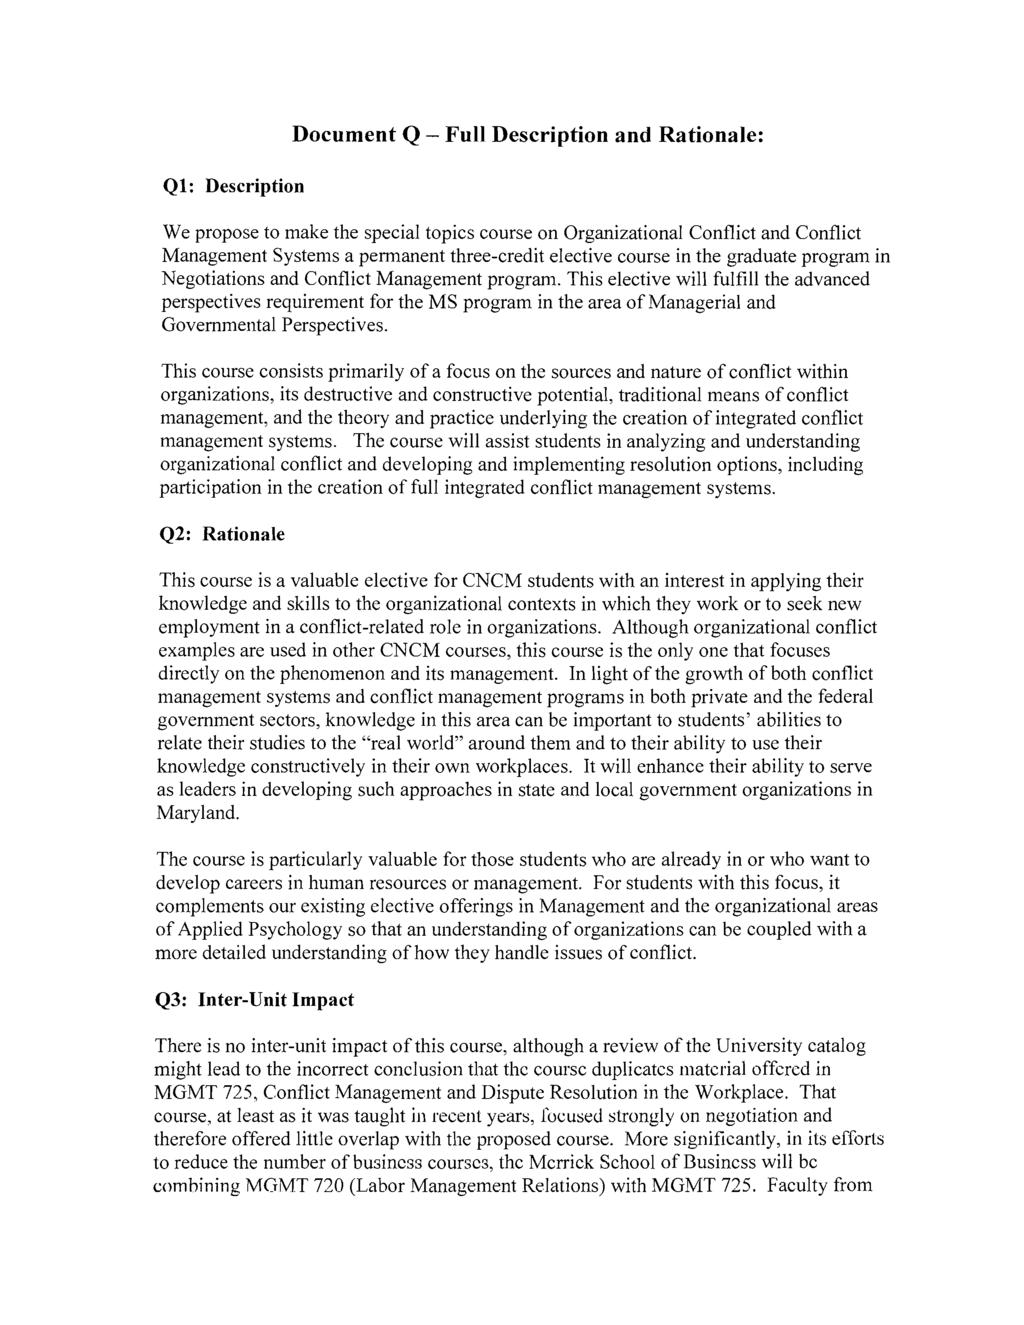 Q1: Description Document Q - Full Description and Rationale: We propose to make the special topics course on Organizational Conflict and Conflict Management Systems a permanent three-credit elective